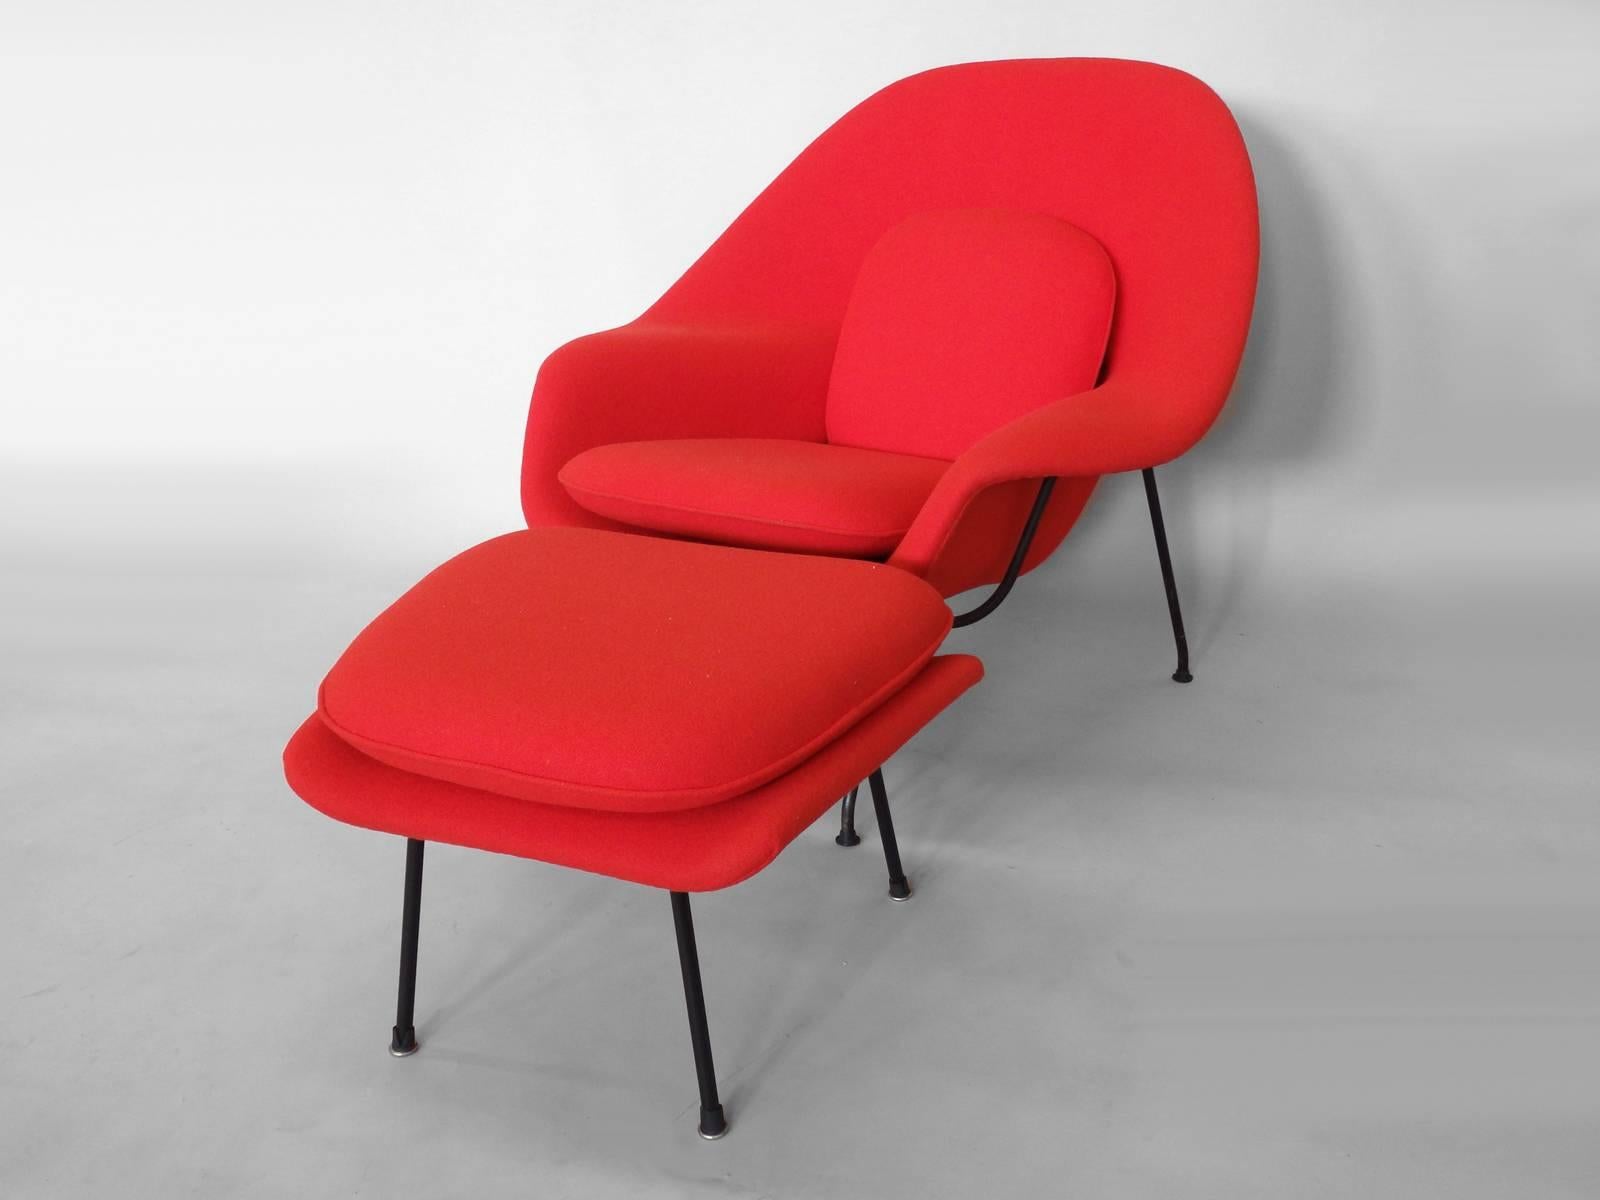 Eero Saarinen for Knoll. Shell has been re-foamed and correctly upholstered in period syle Maharam Kvadrat wool textile. Black frame powder coated new glides have been added.
Measures: Chair: 40” wide x 31” deep x 35.5” tall.
Ottoman: 20” deep x